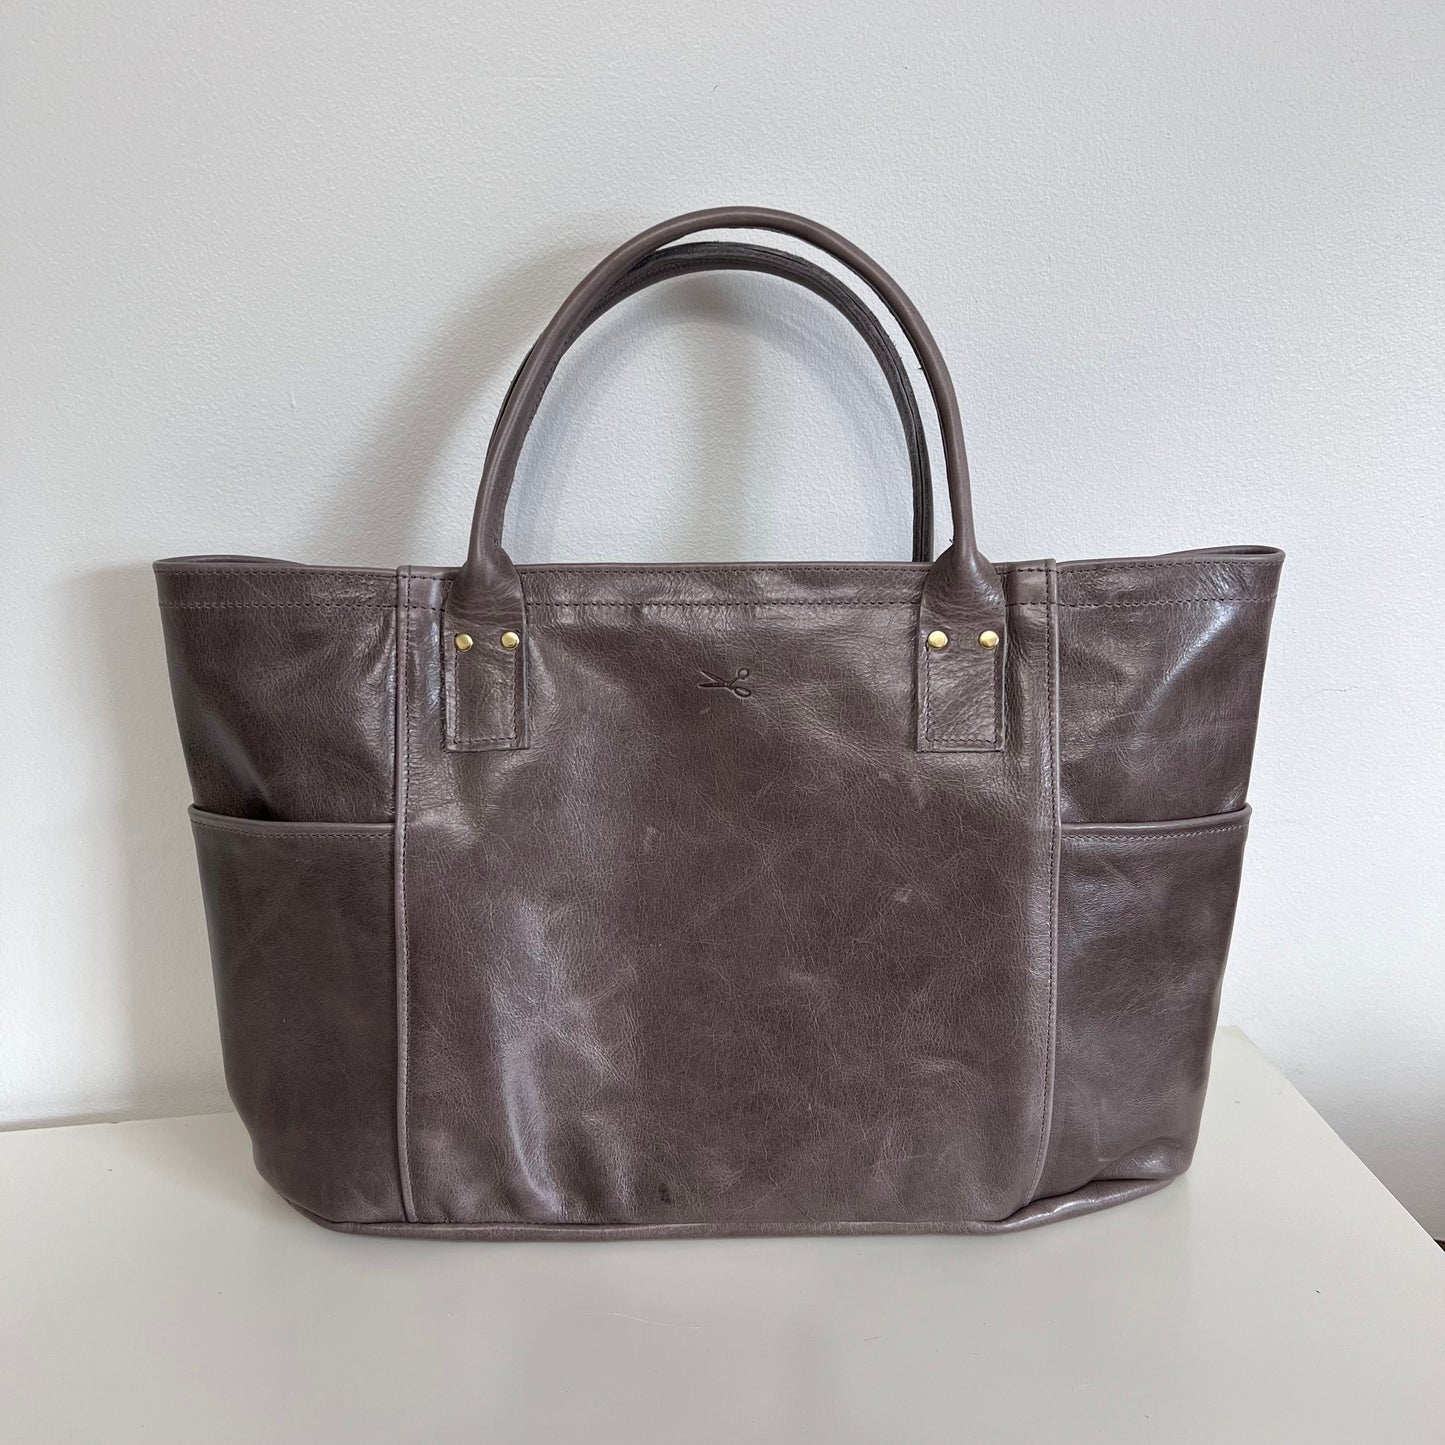 Carry-all Leather Bag- READY TO SHIP